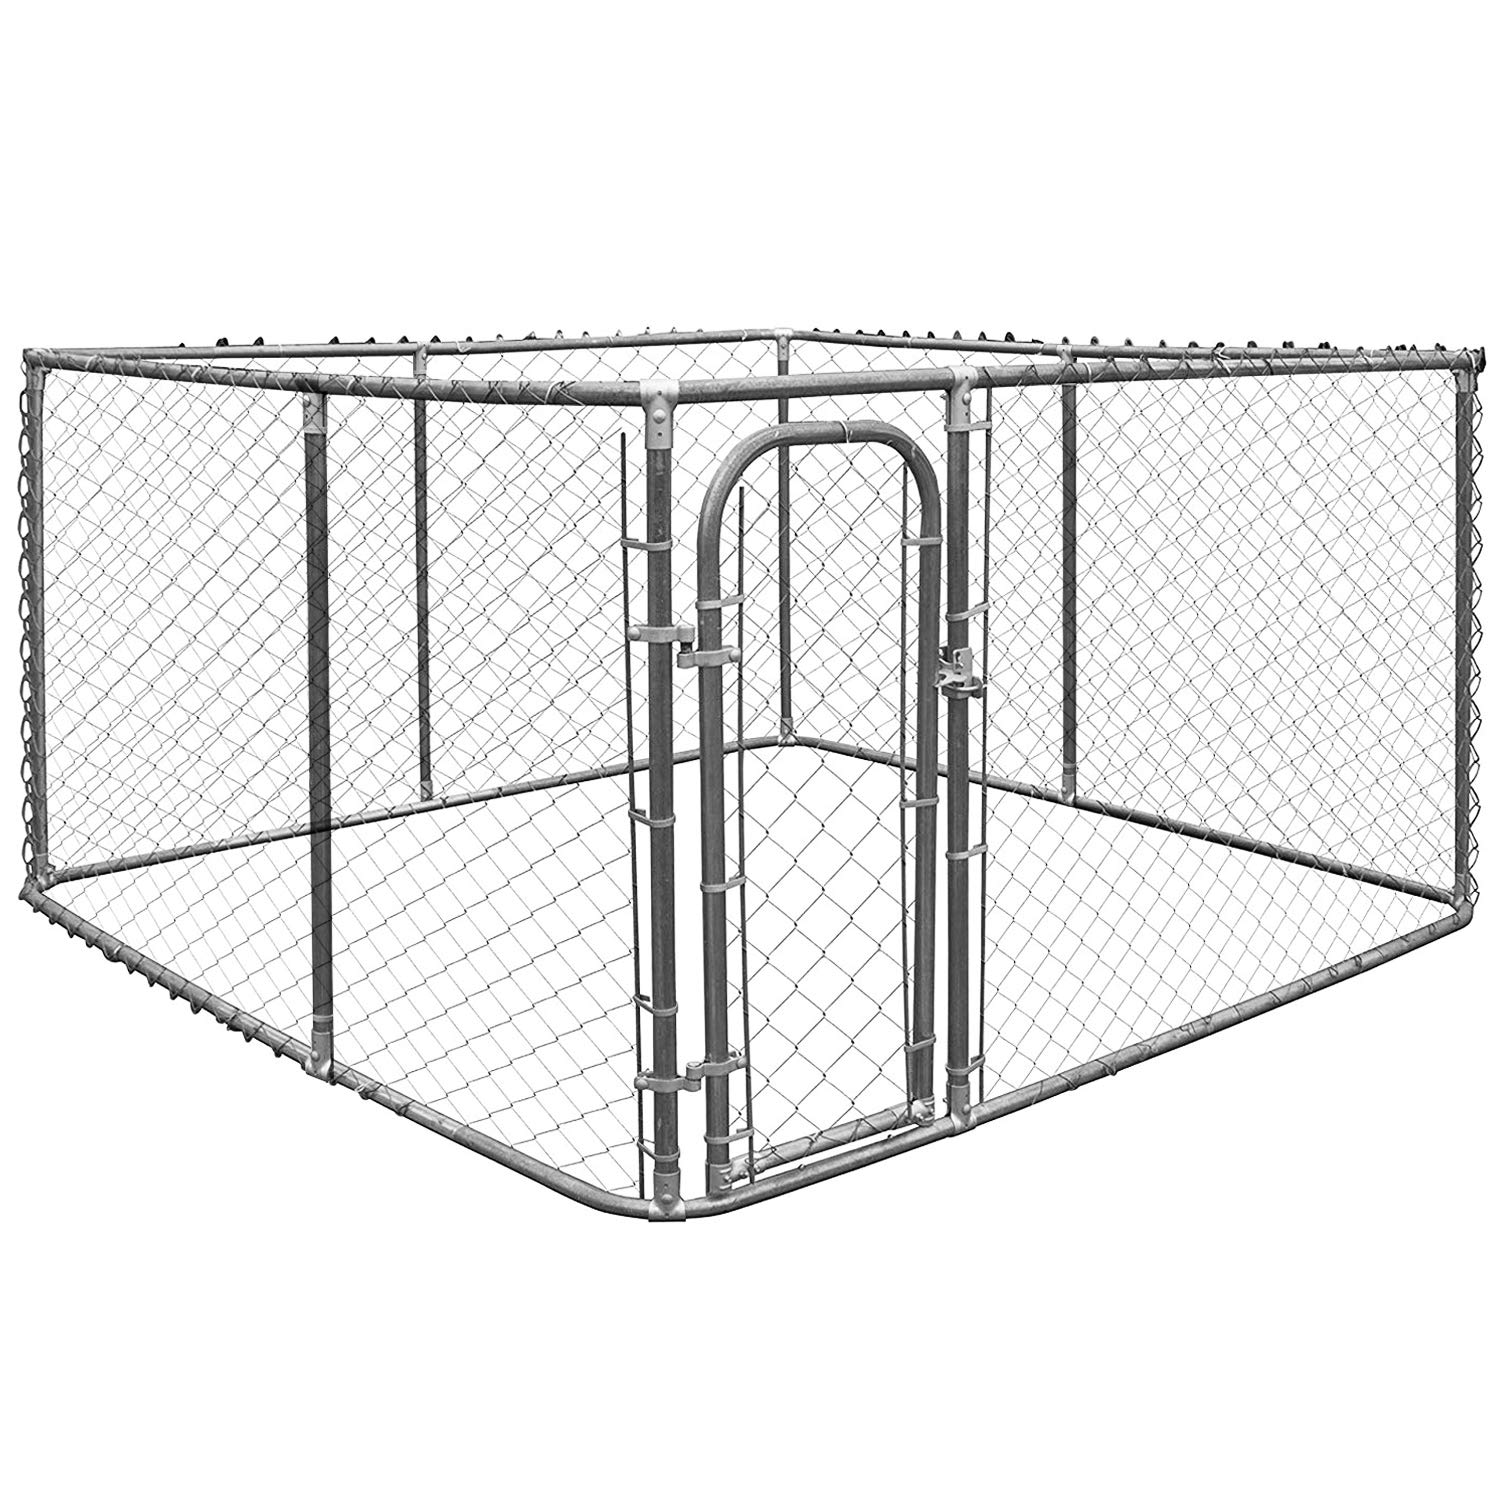 7.5ft x 7.5ft Large Outdoor Dog Kennel - Giantex